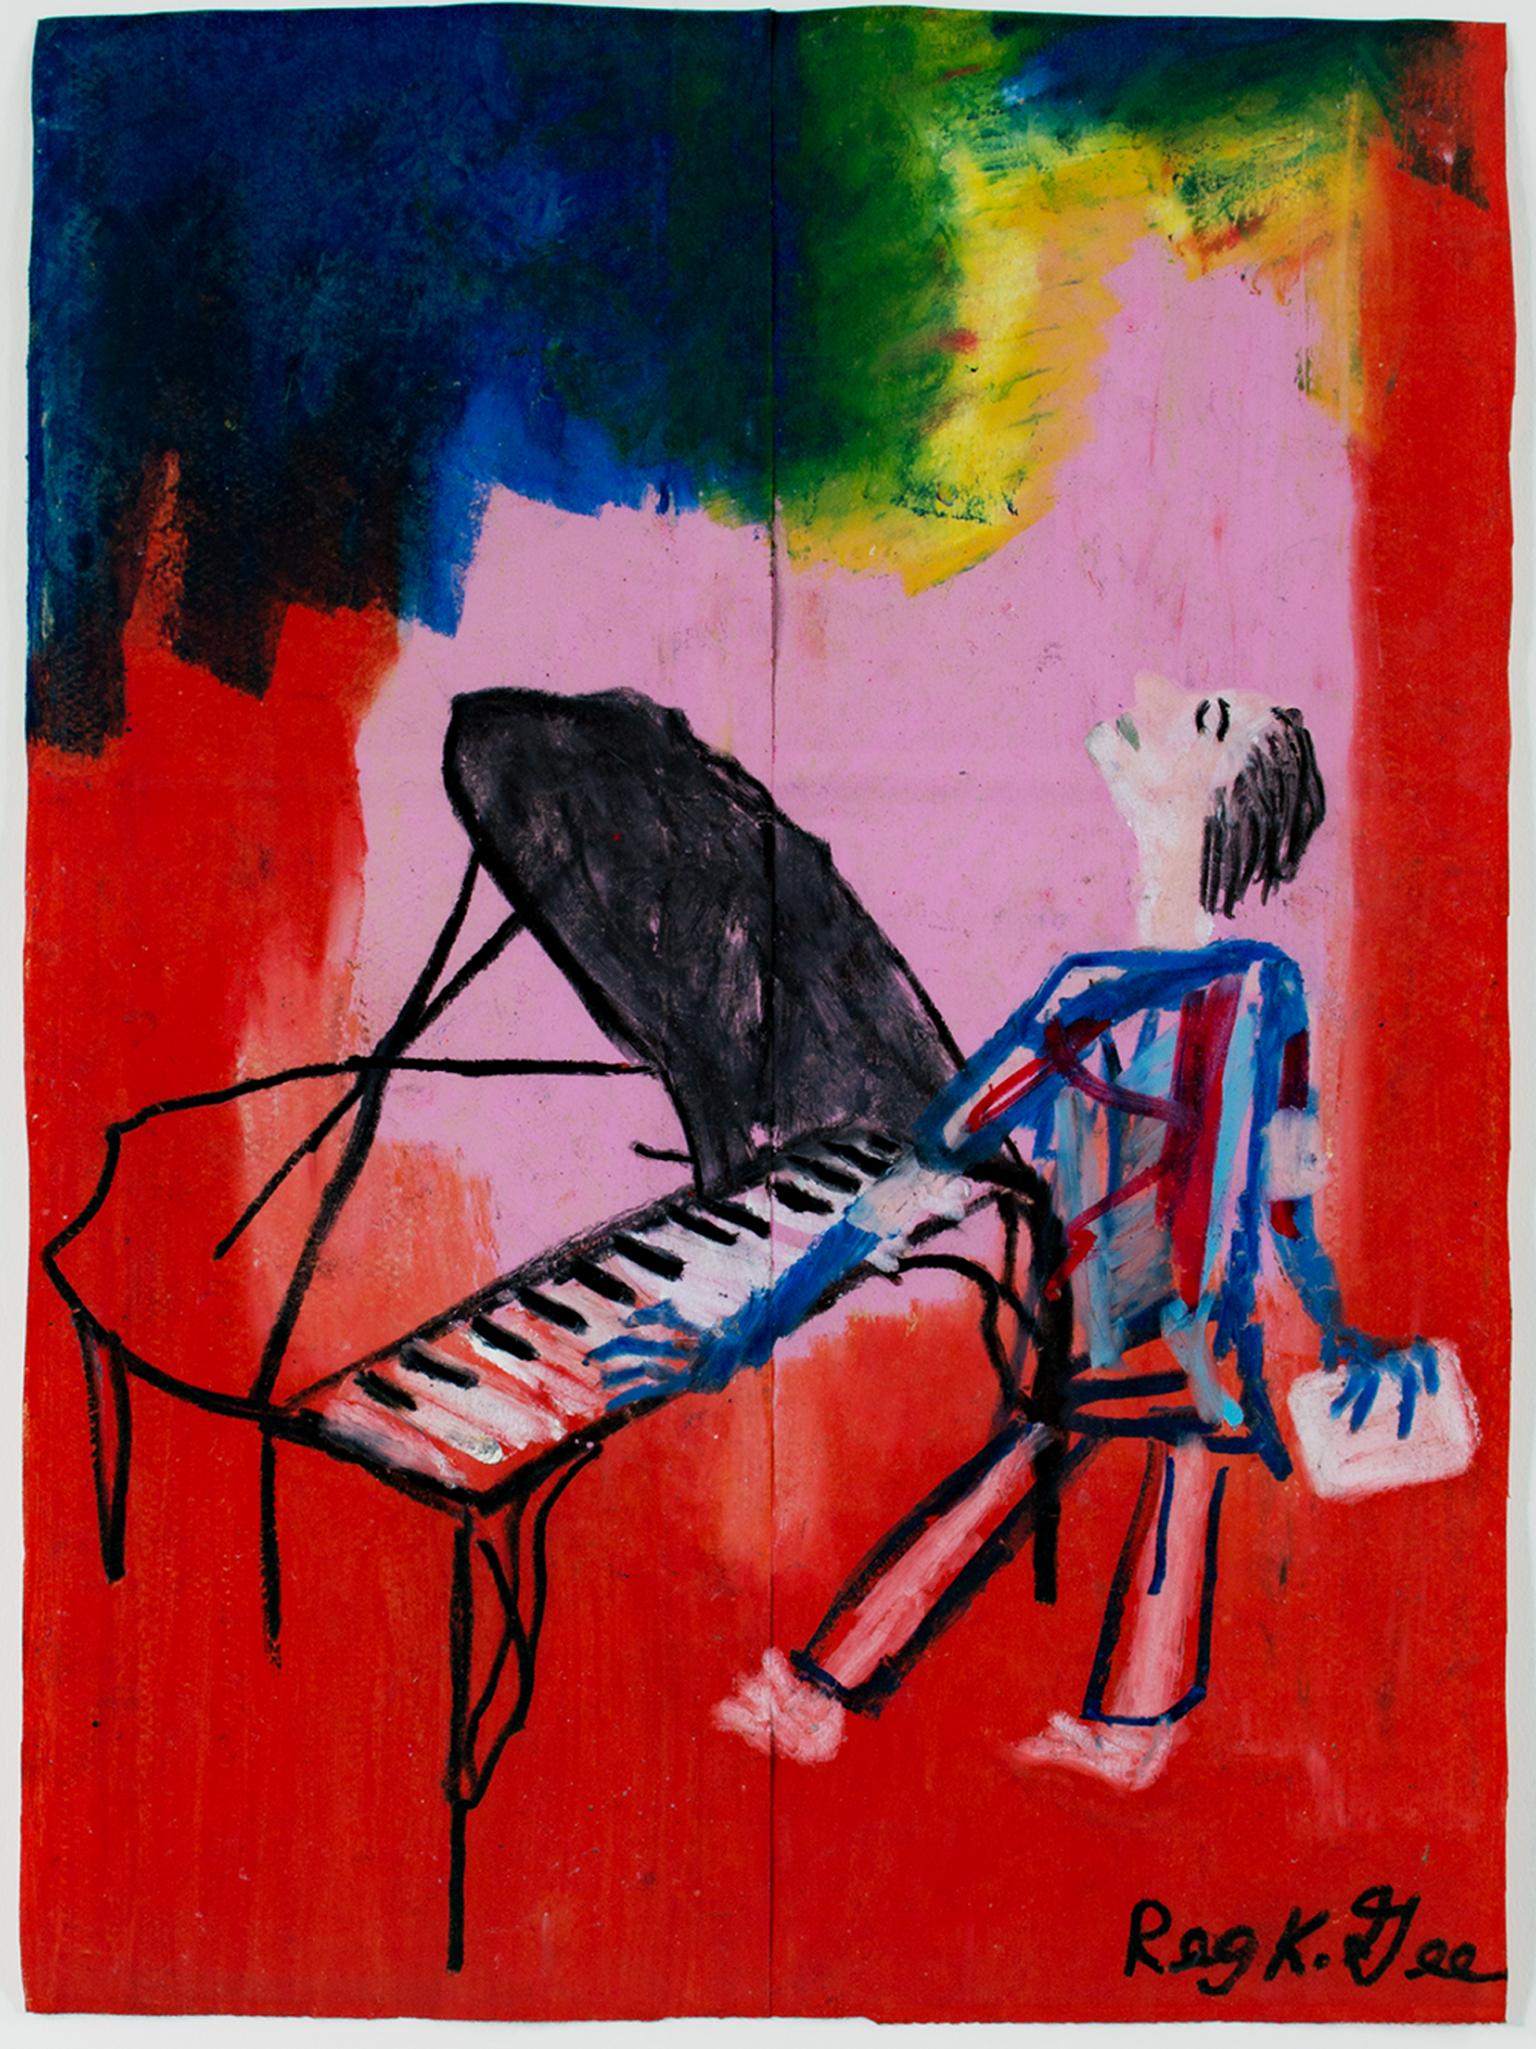 "3AM Sleepwalking Composer" is an original oil pastel drawing on a grocery bag by Reginald K. Gee. The artist signed the piece lower right as well as signing & dating it on the back. It depicts a sleeping man at a piano. 

16 3/4" x 12" art
23 3/4"